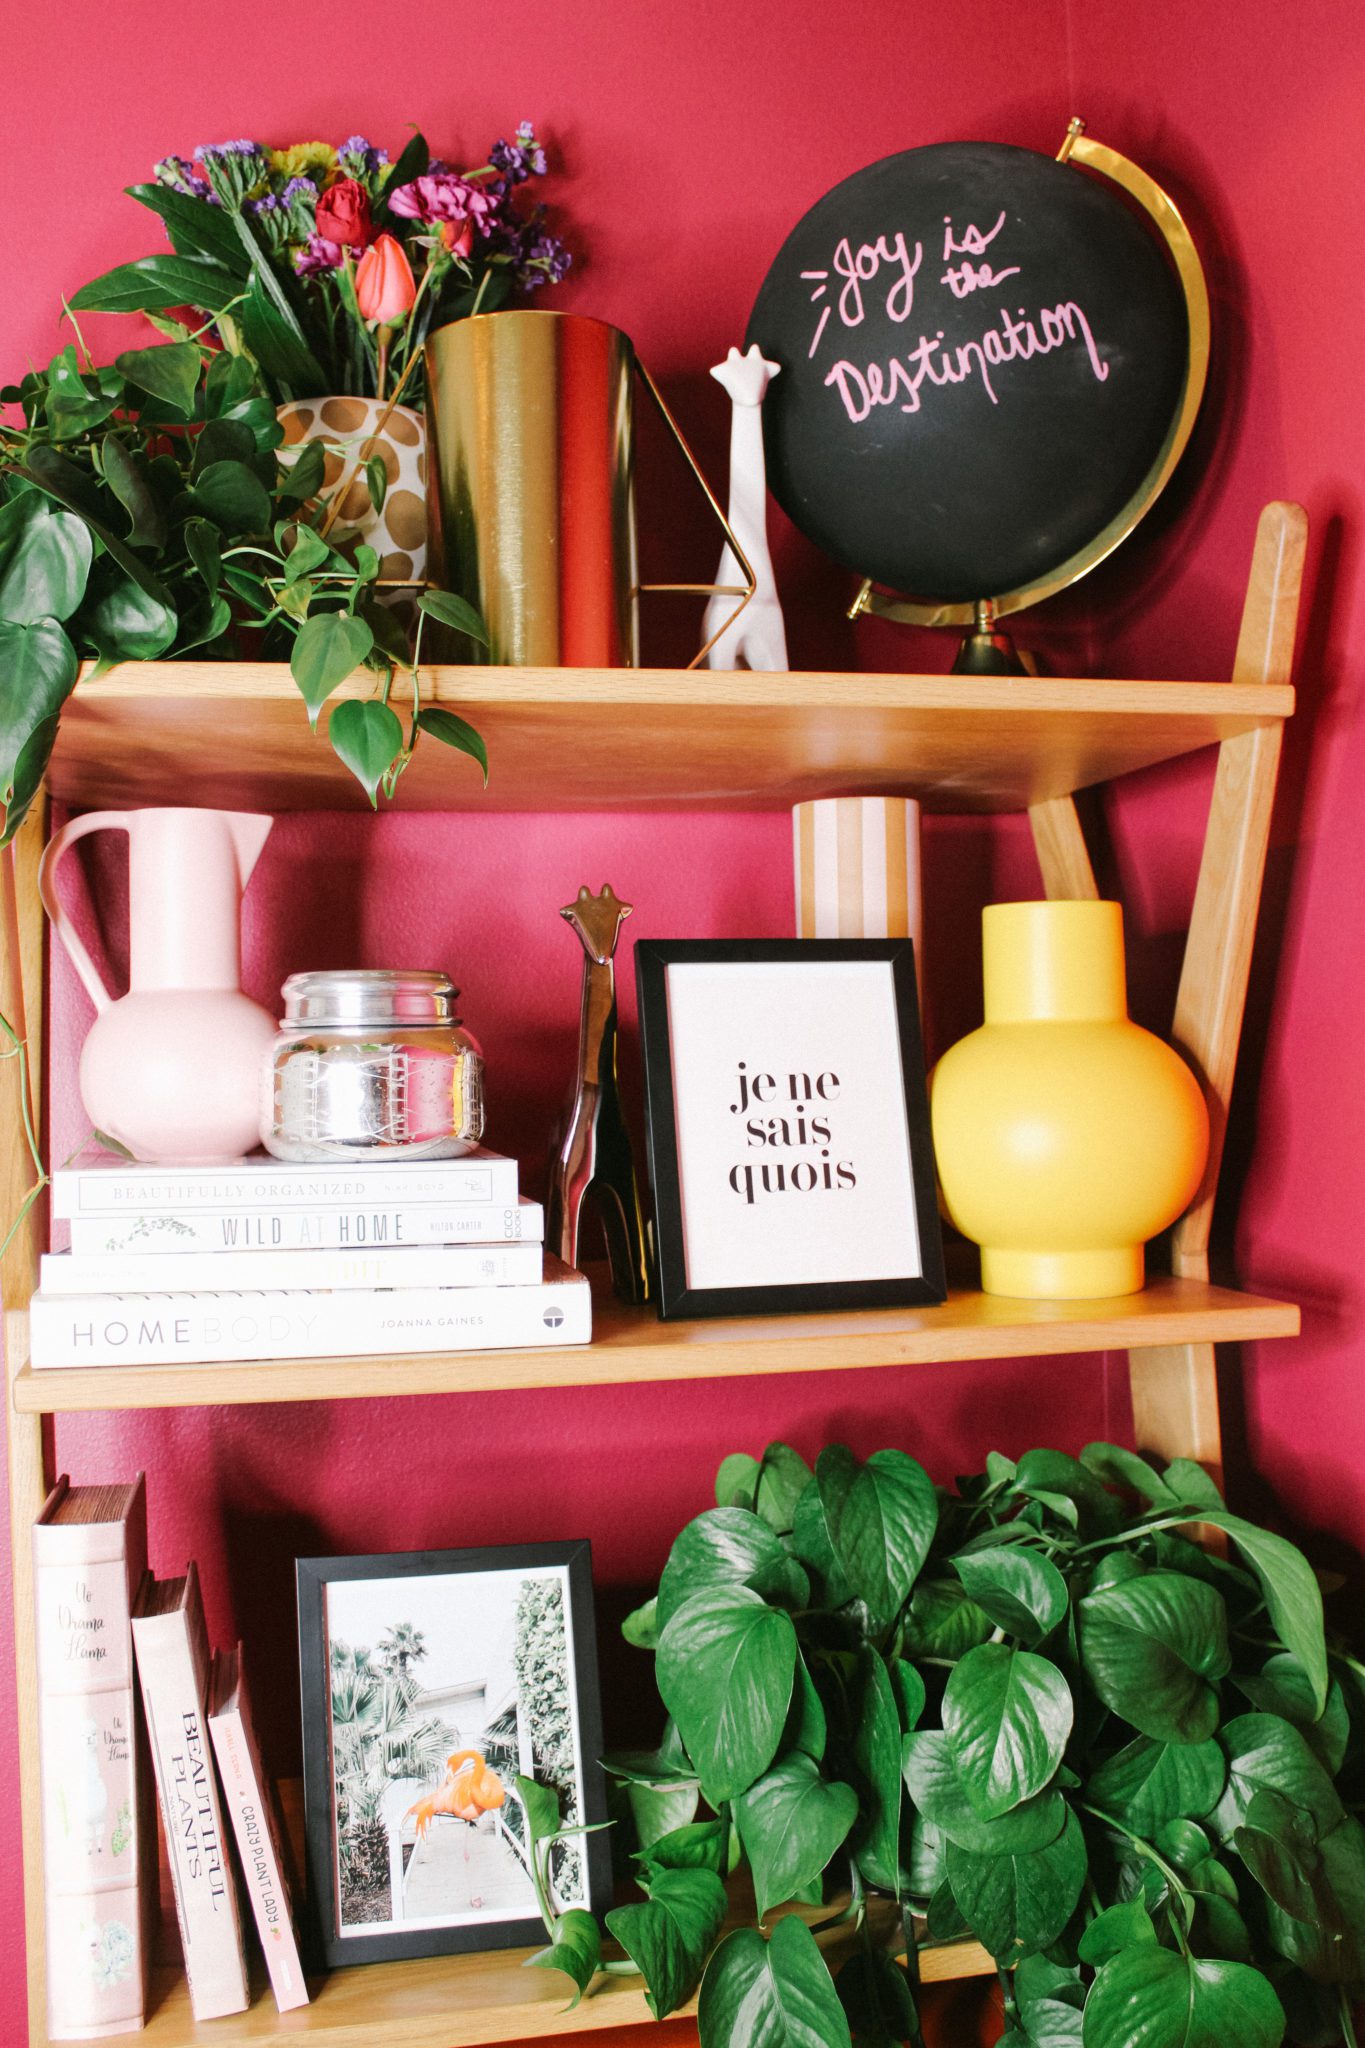 4 Foolproof Tips for Styling a Bookshelf That’s Anything but Bland